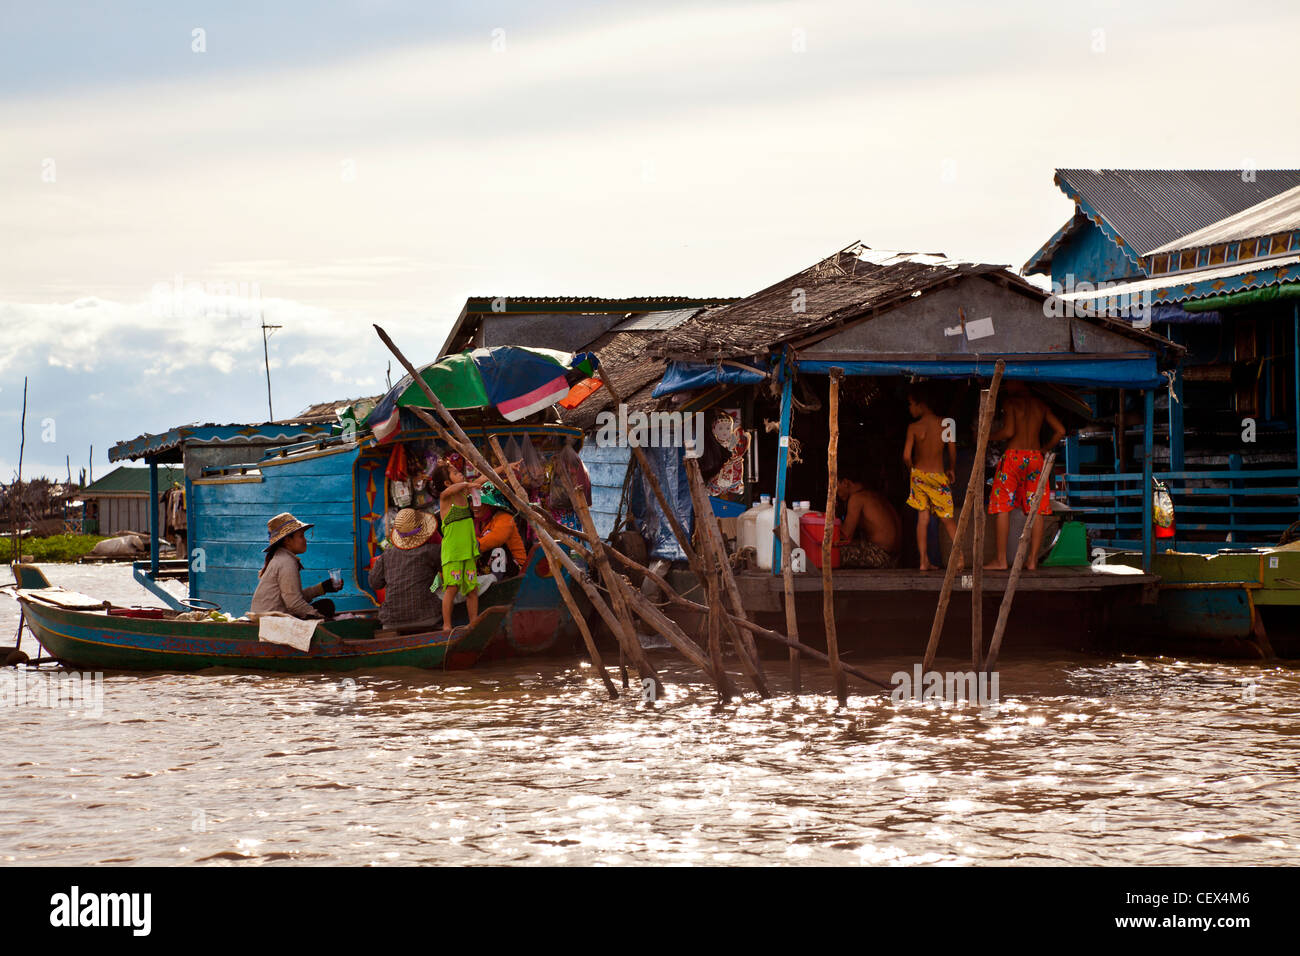 People at a floating shop in a floating village on the Tonlé Sap lake near Siem Reap, Cambodia Stock Photo